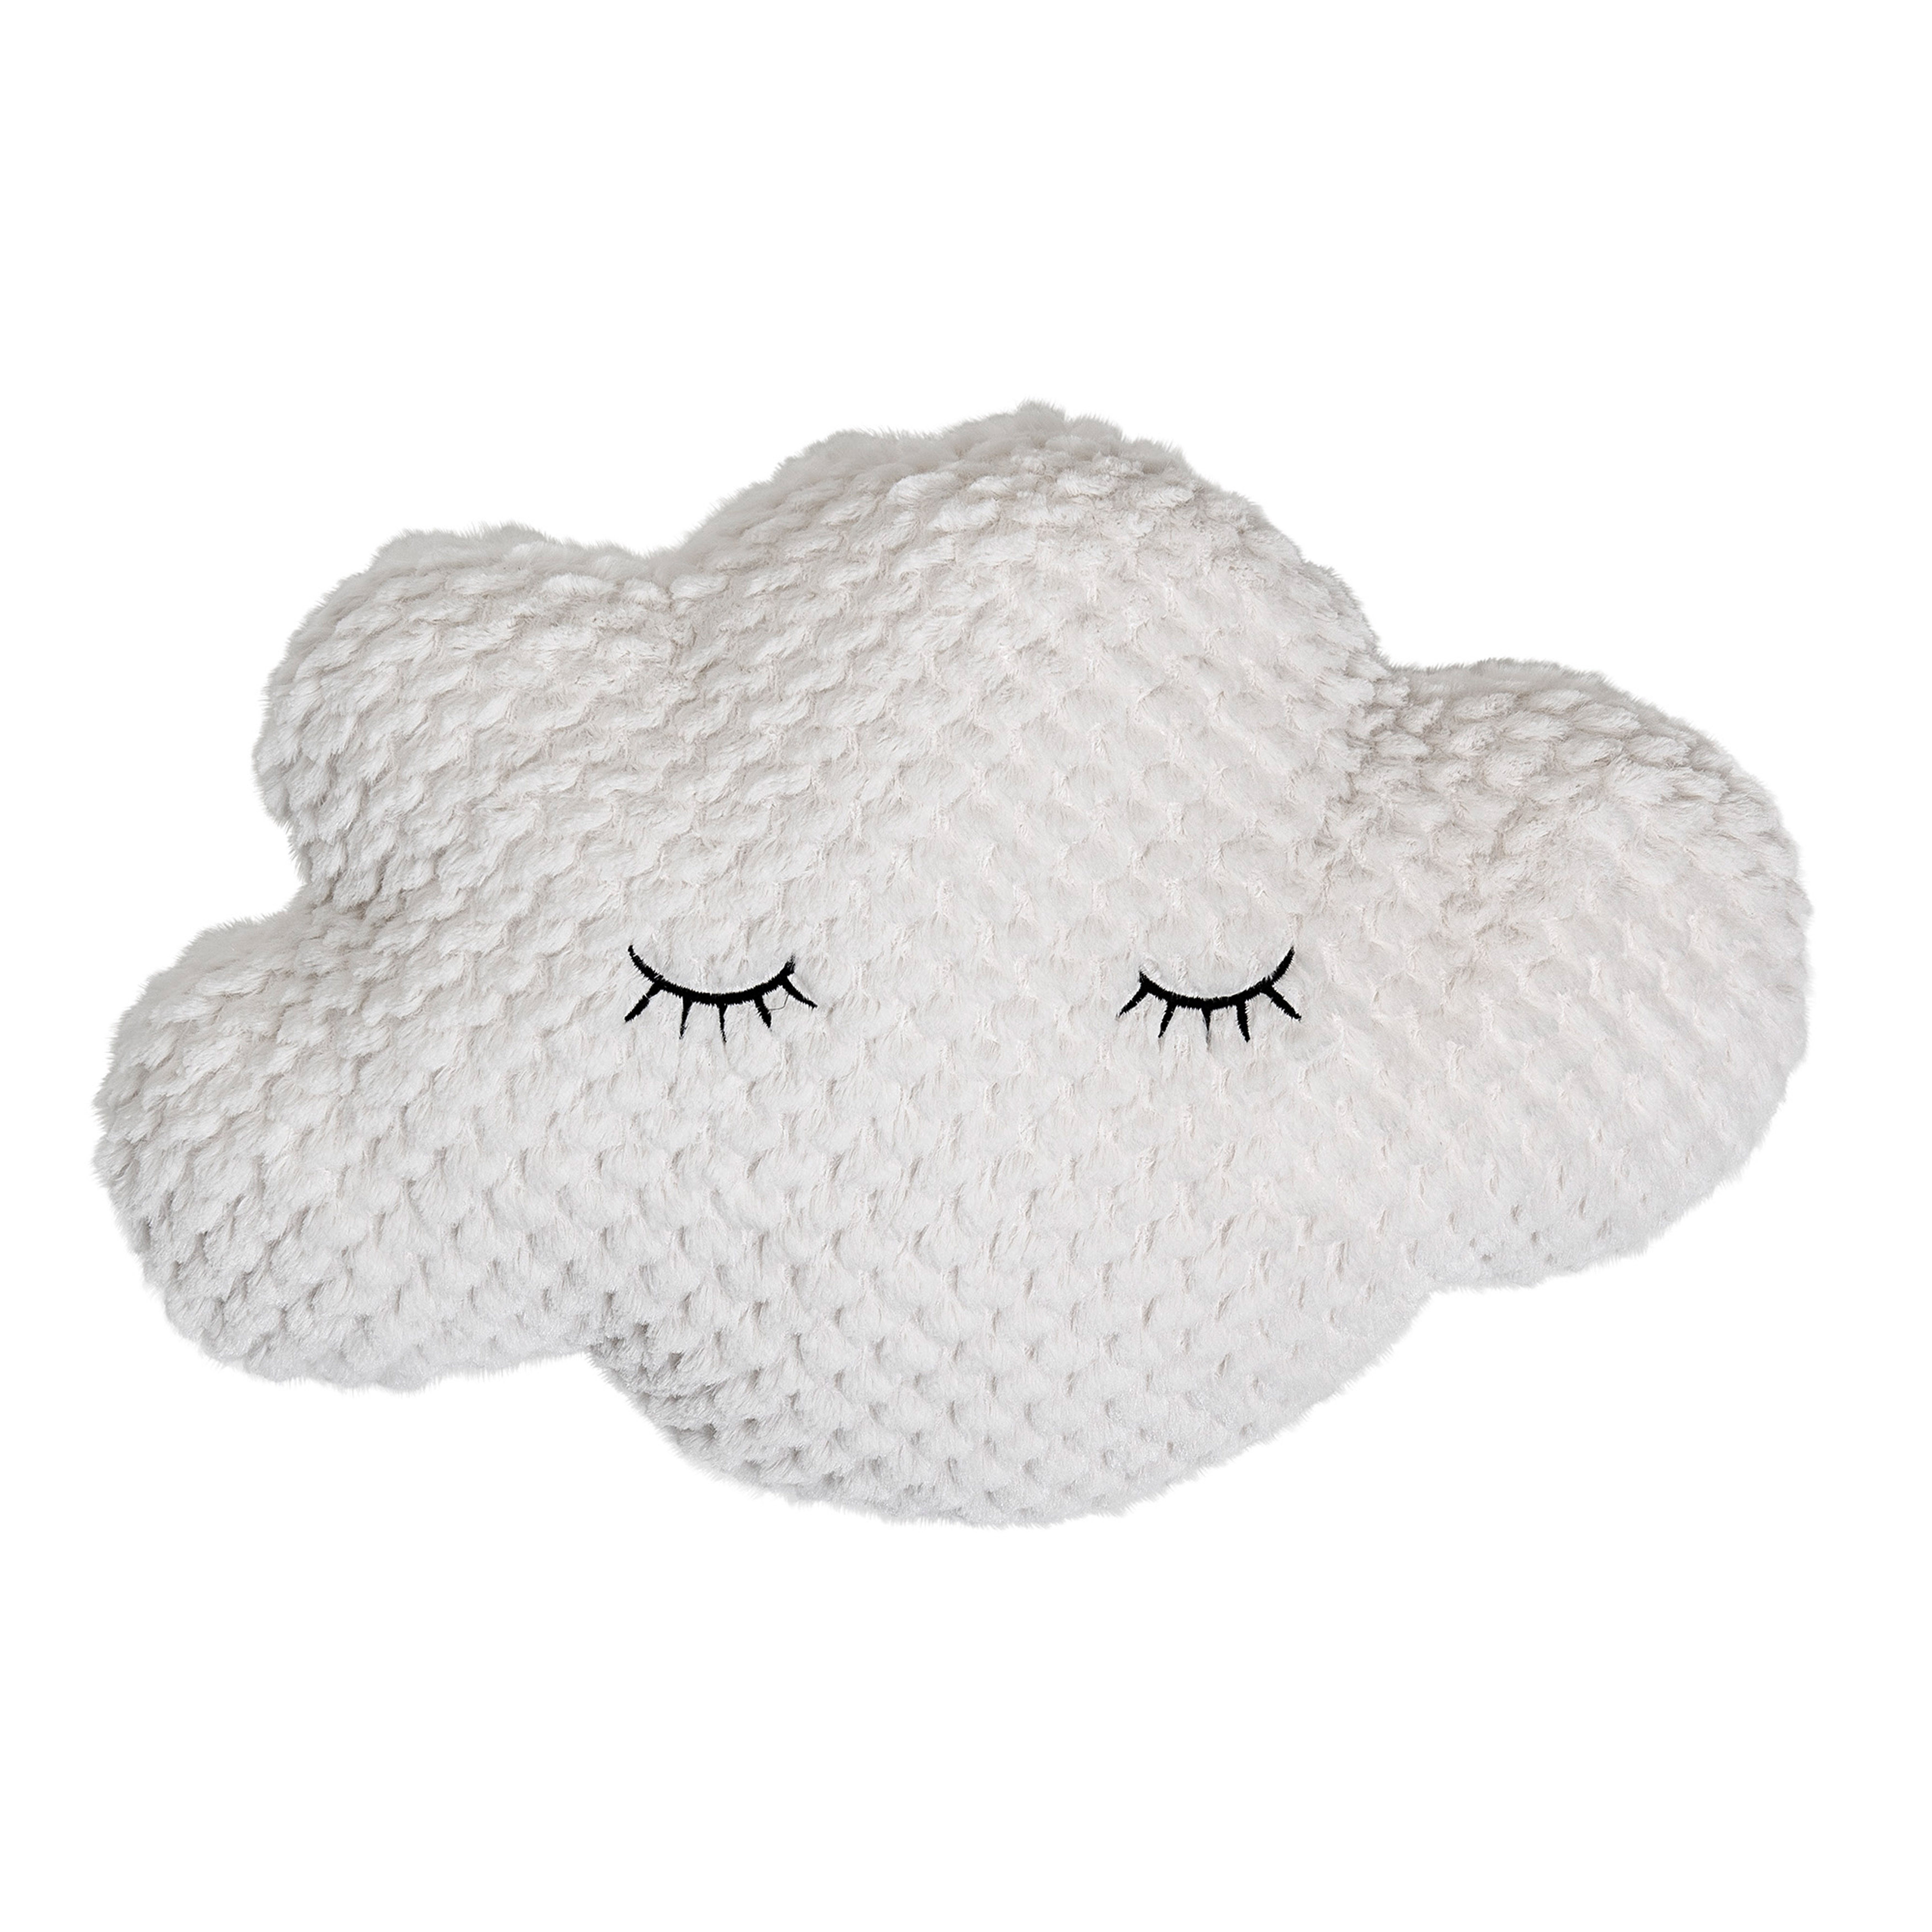 Cloud Pillow with Eyelashes, White Polyester, 18" x 12" - Moss & Wilder